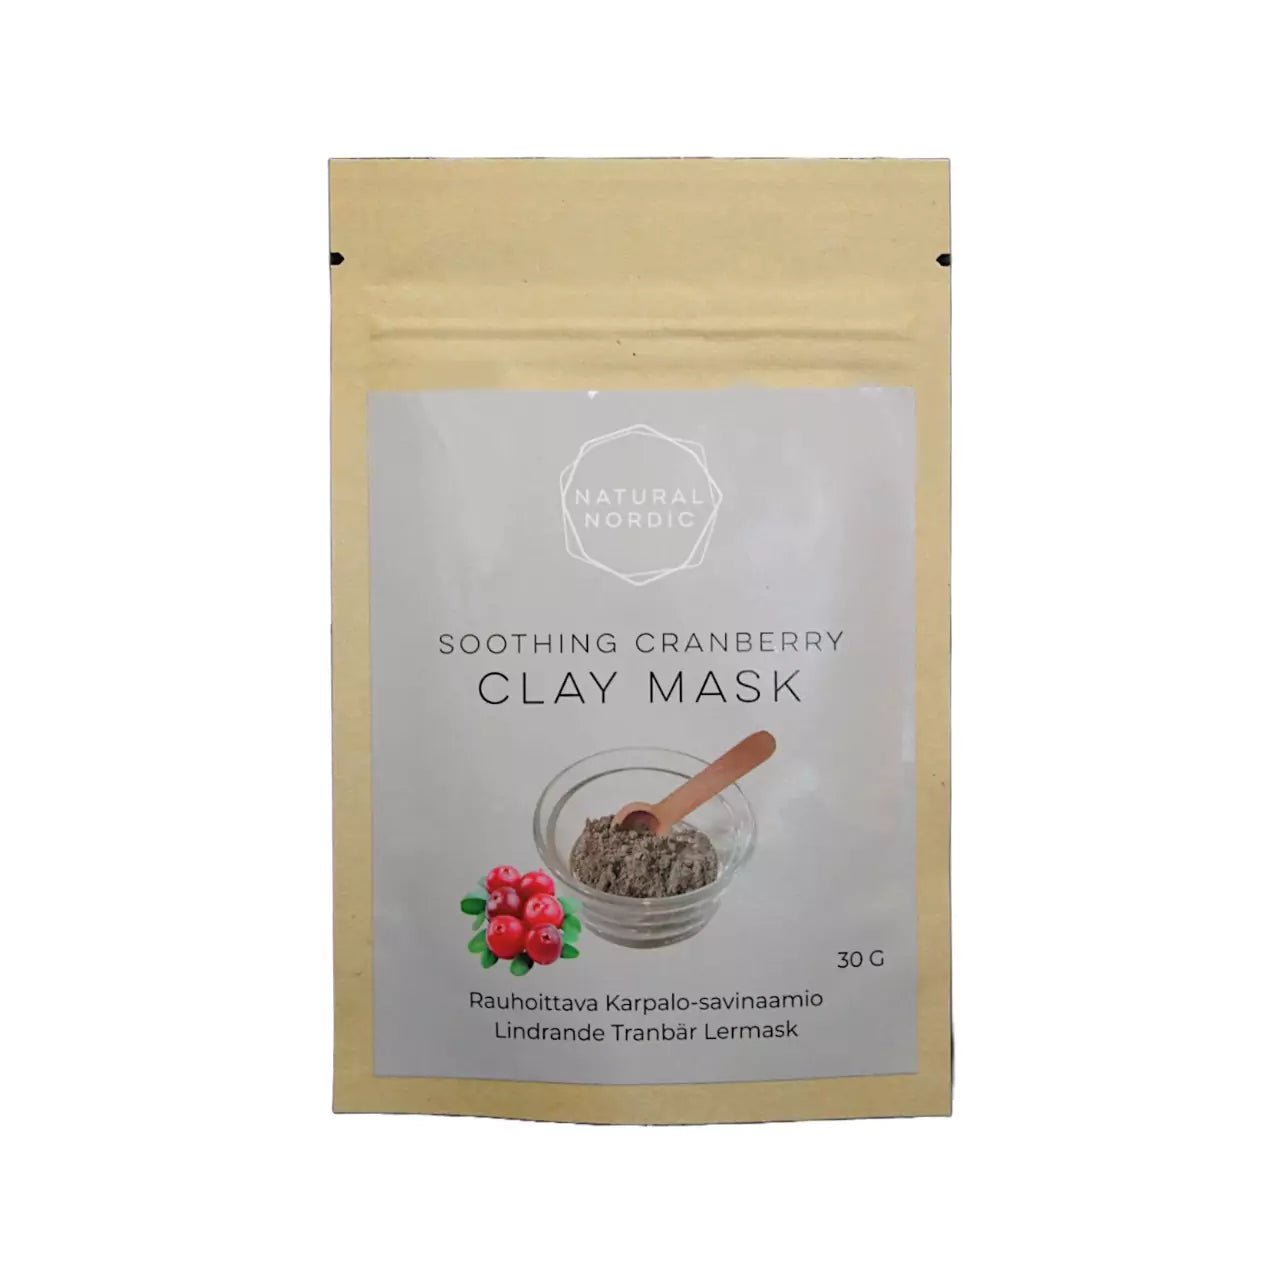 CRANBERRY CLAY MASK - Natural Nordic